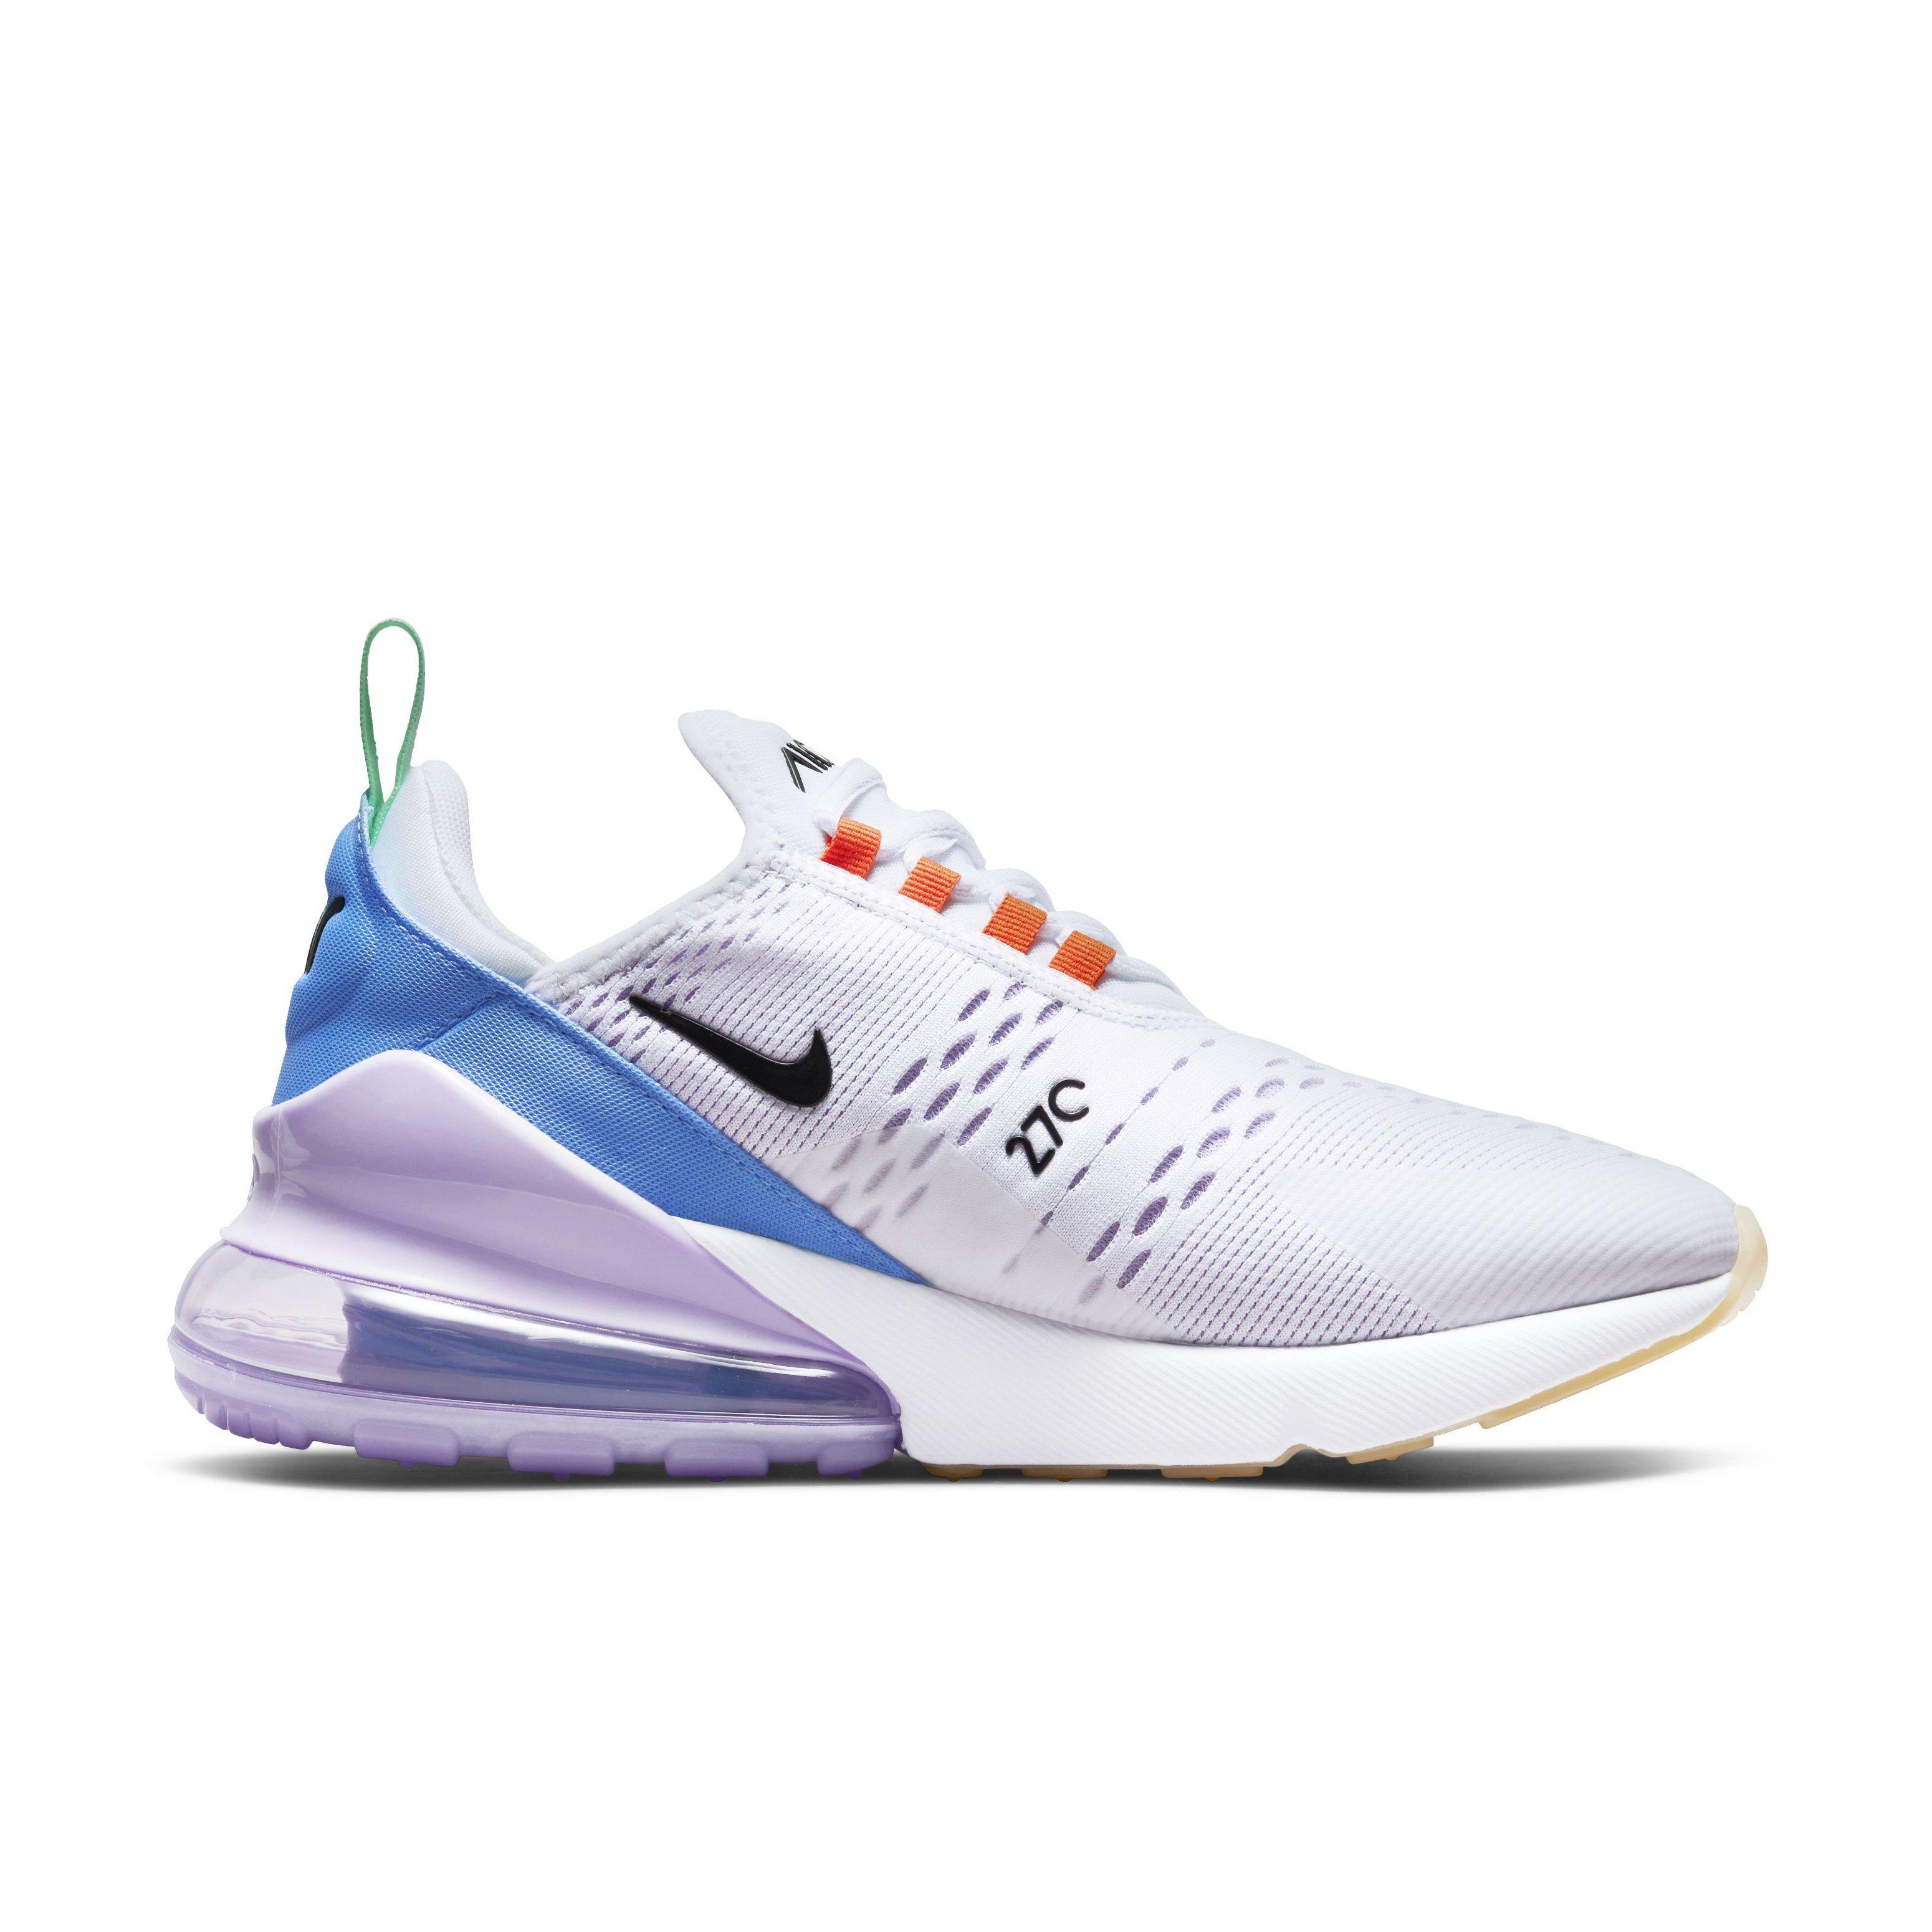 Air Max 270 "White/Lilac/Safety Women's Shoe